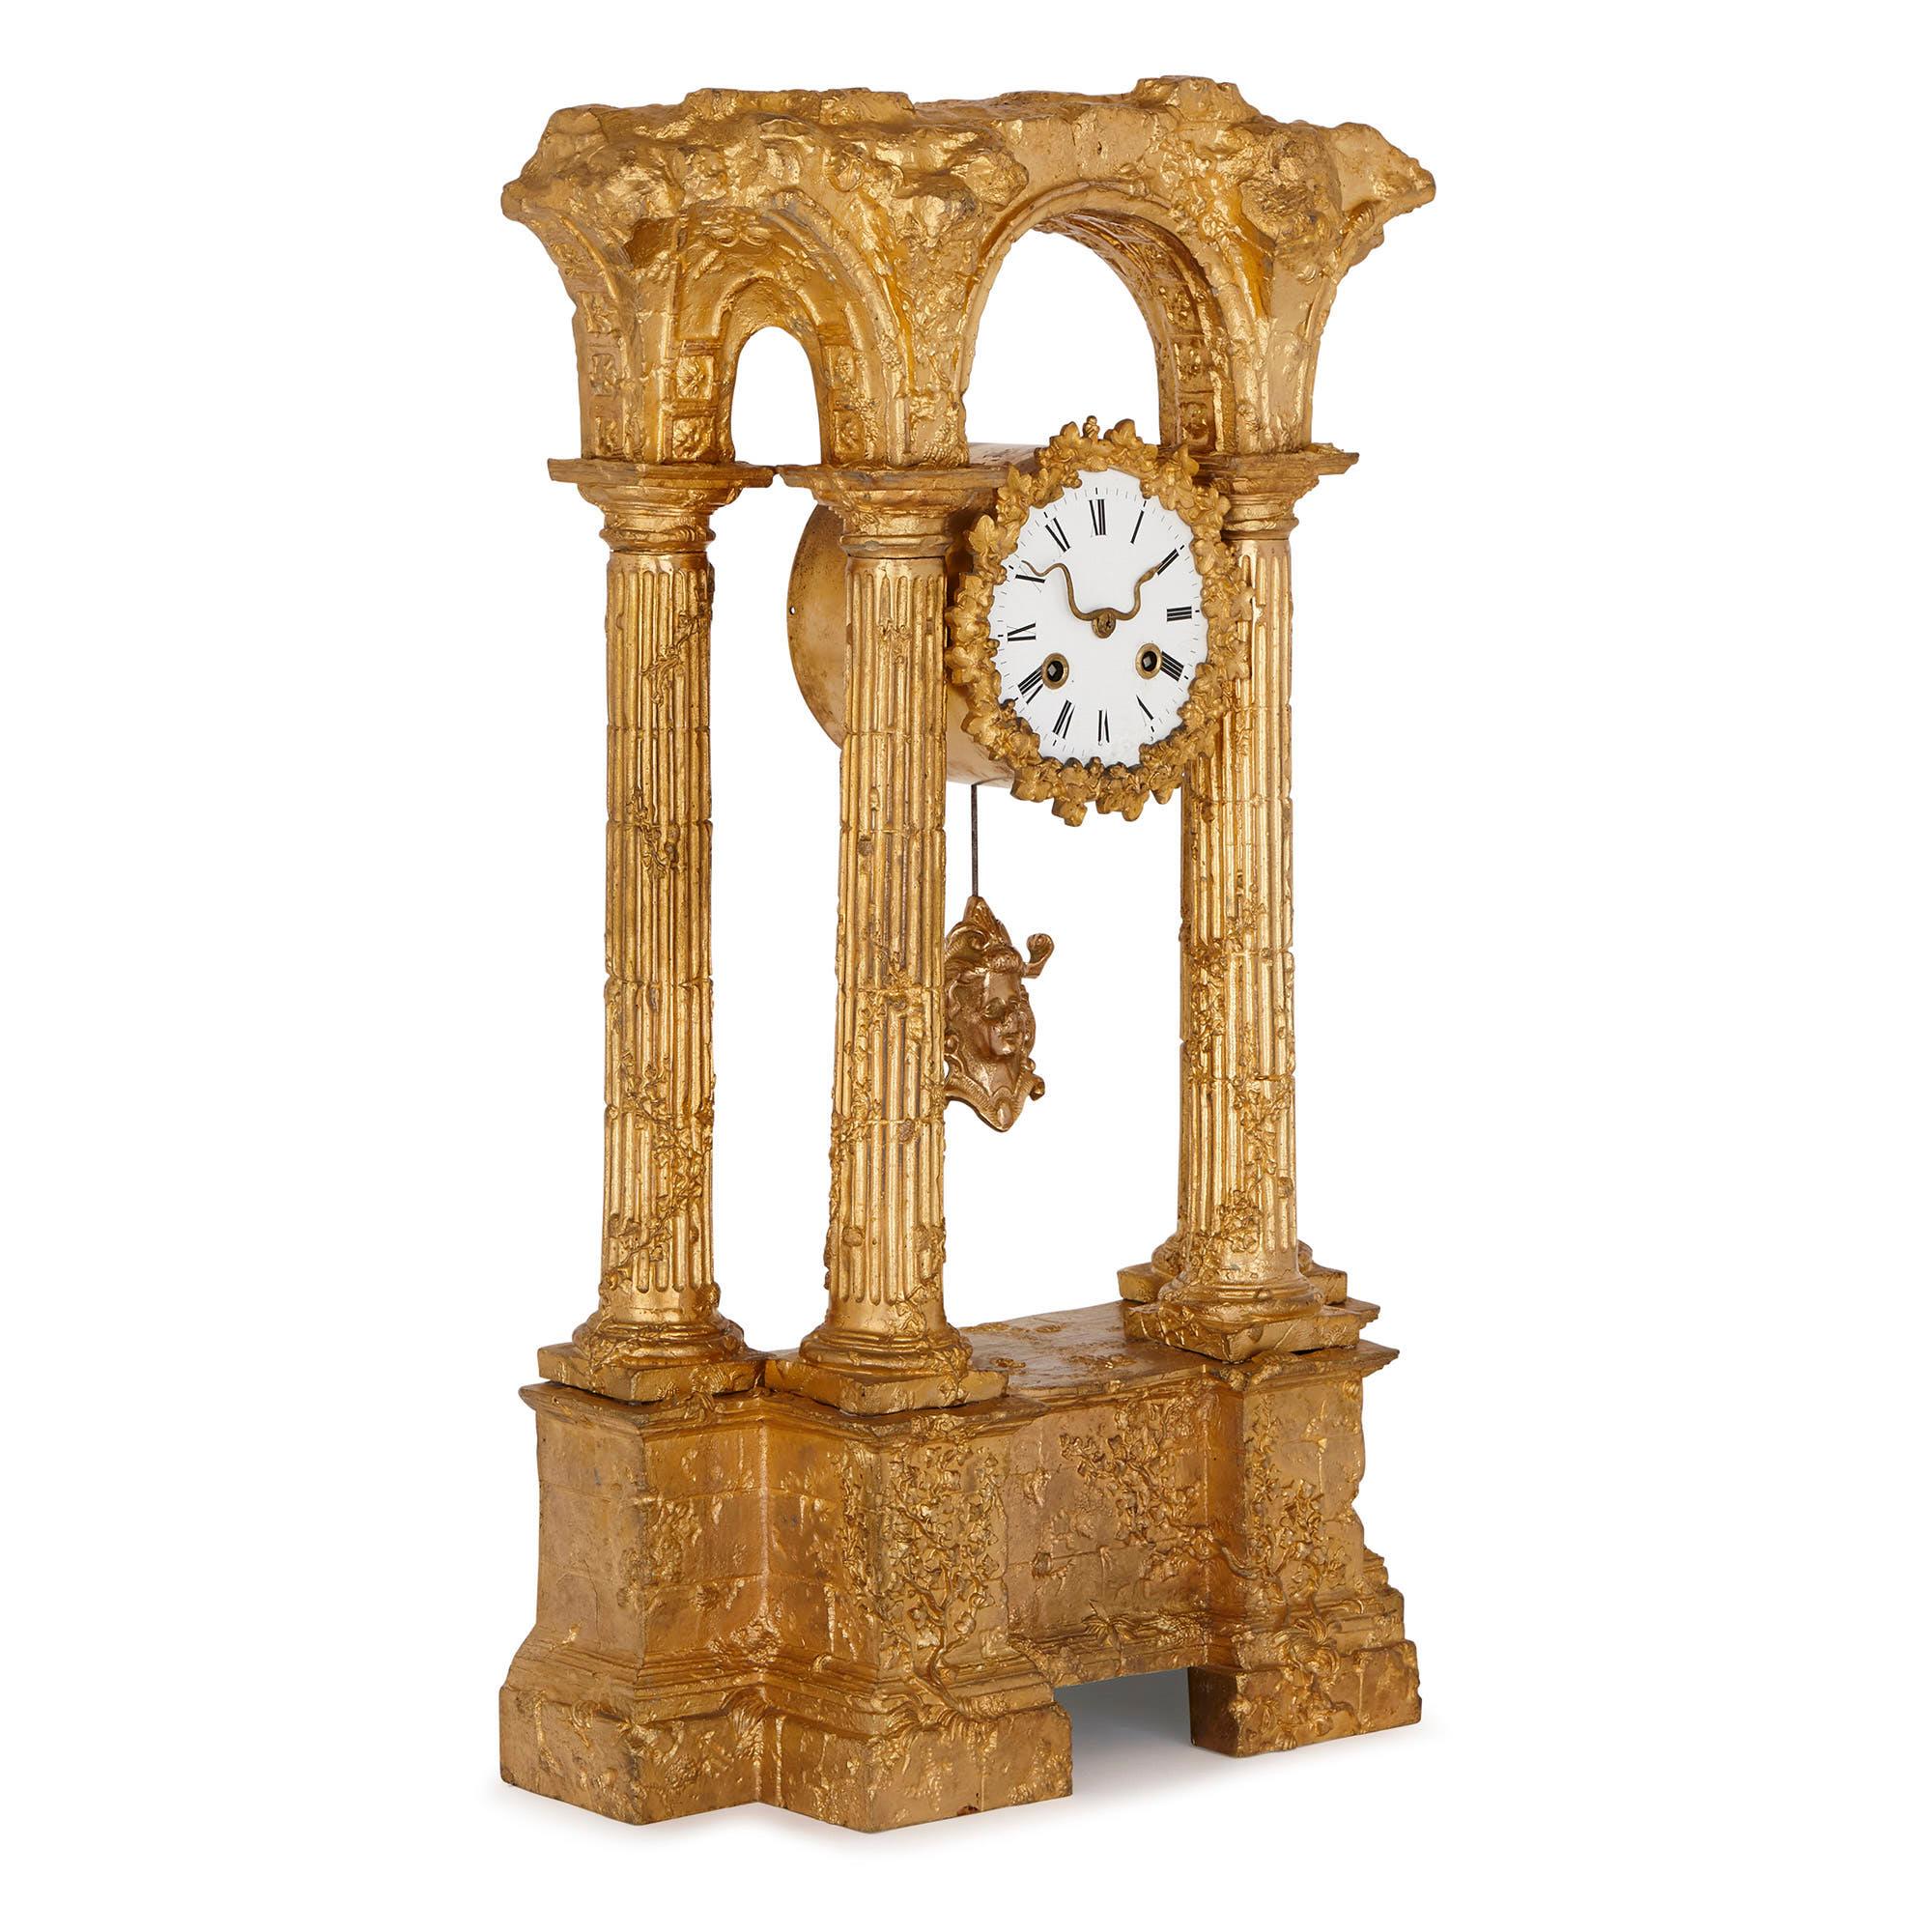 This wonderful mantel clock is designed in the image of an ancient Roman ruin. The clock is clearly inspired by the kind of prints, paintings and drawings of dilapidated Roman buildings, which were brought back from Italy by Grand Tourists in the